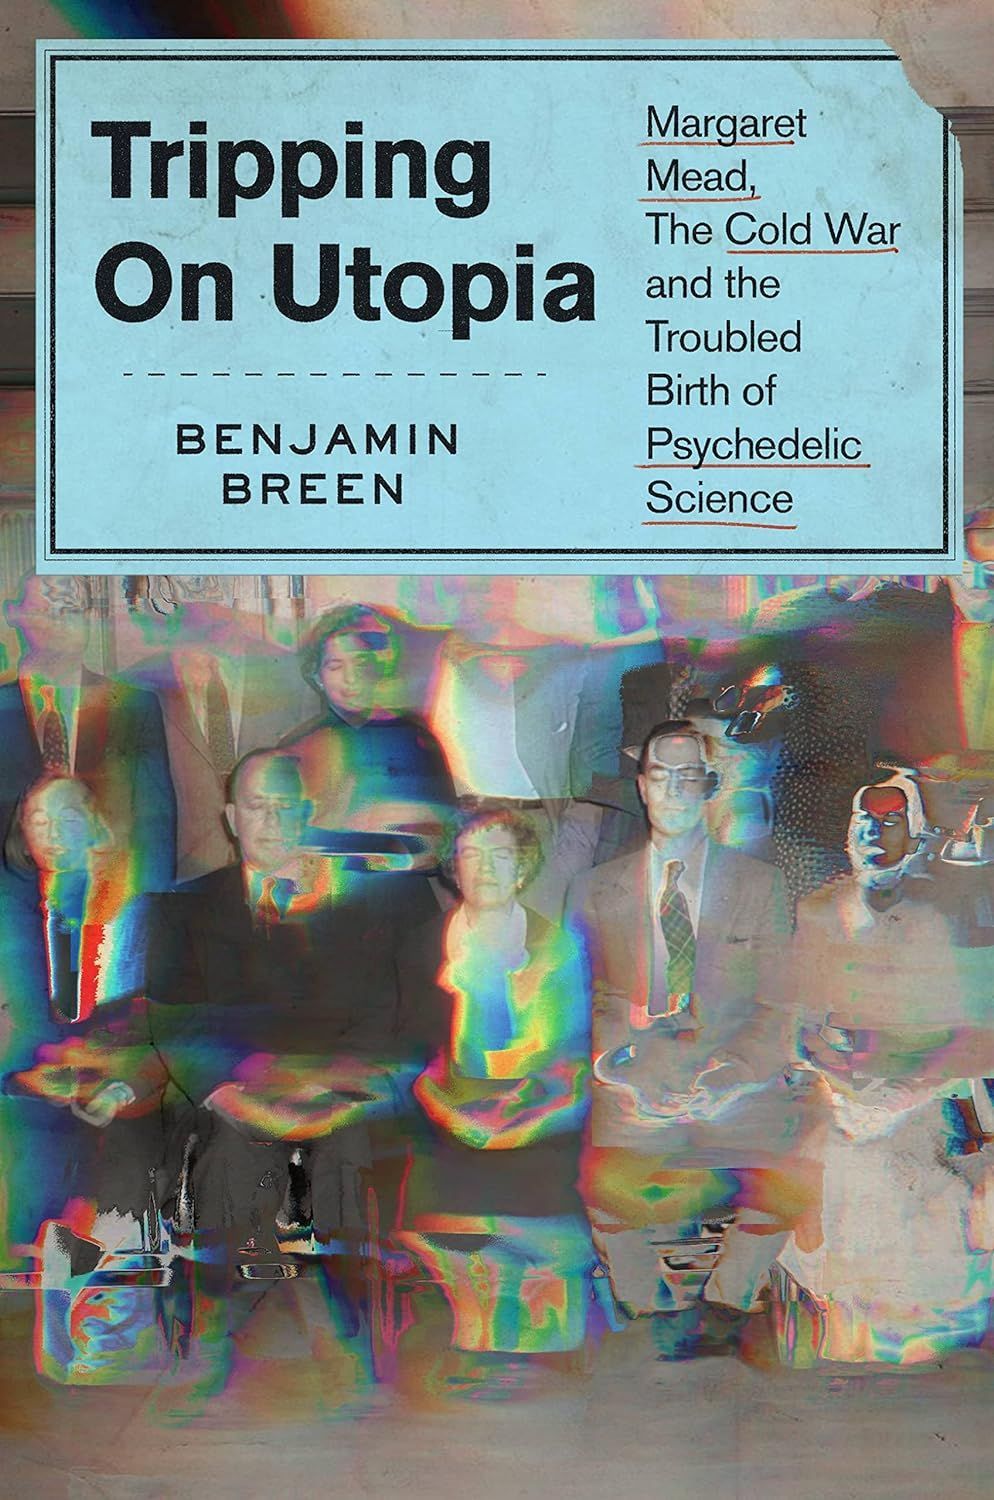 Timothy Leary Is Why We Can’t Have Nice Things: On Benjamin Breen’s “Tripping on Utopia”